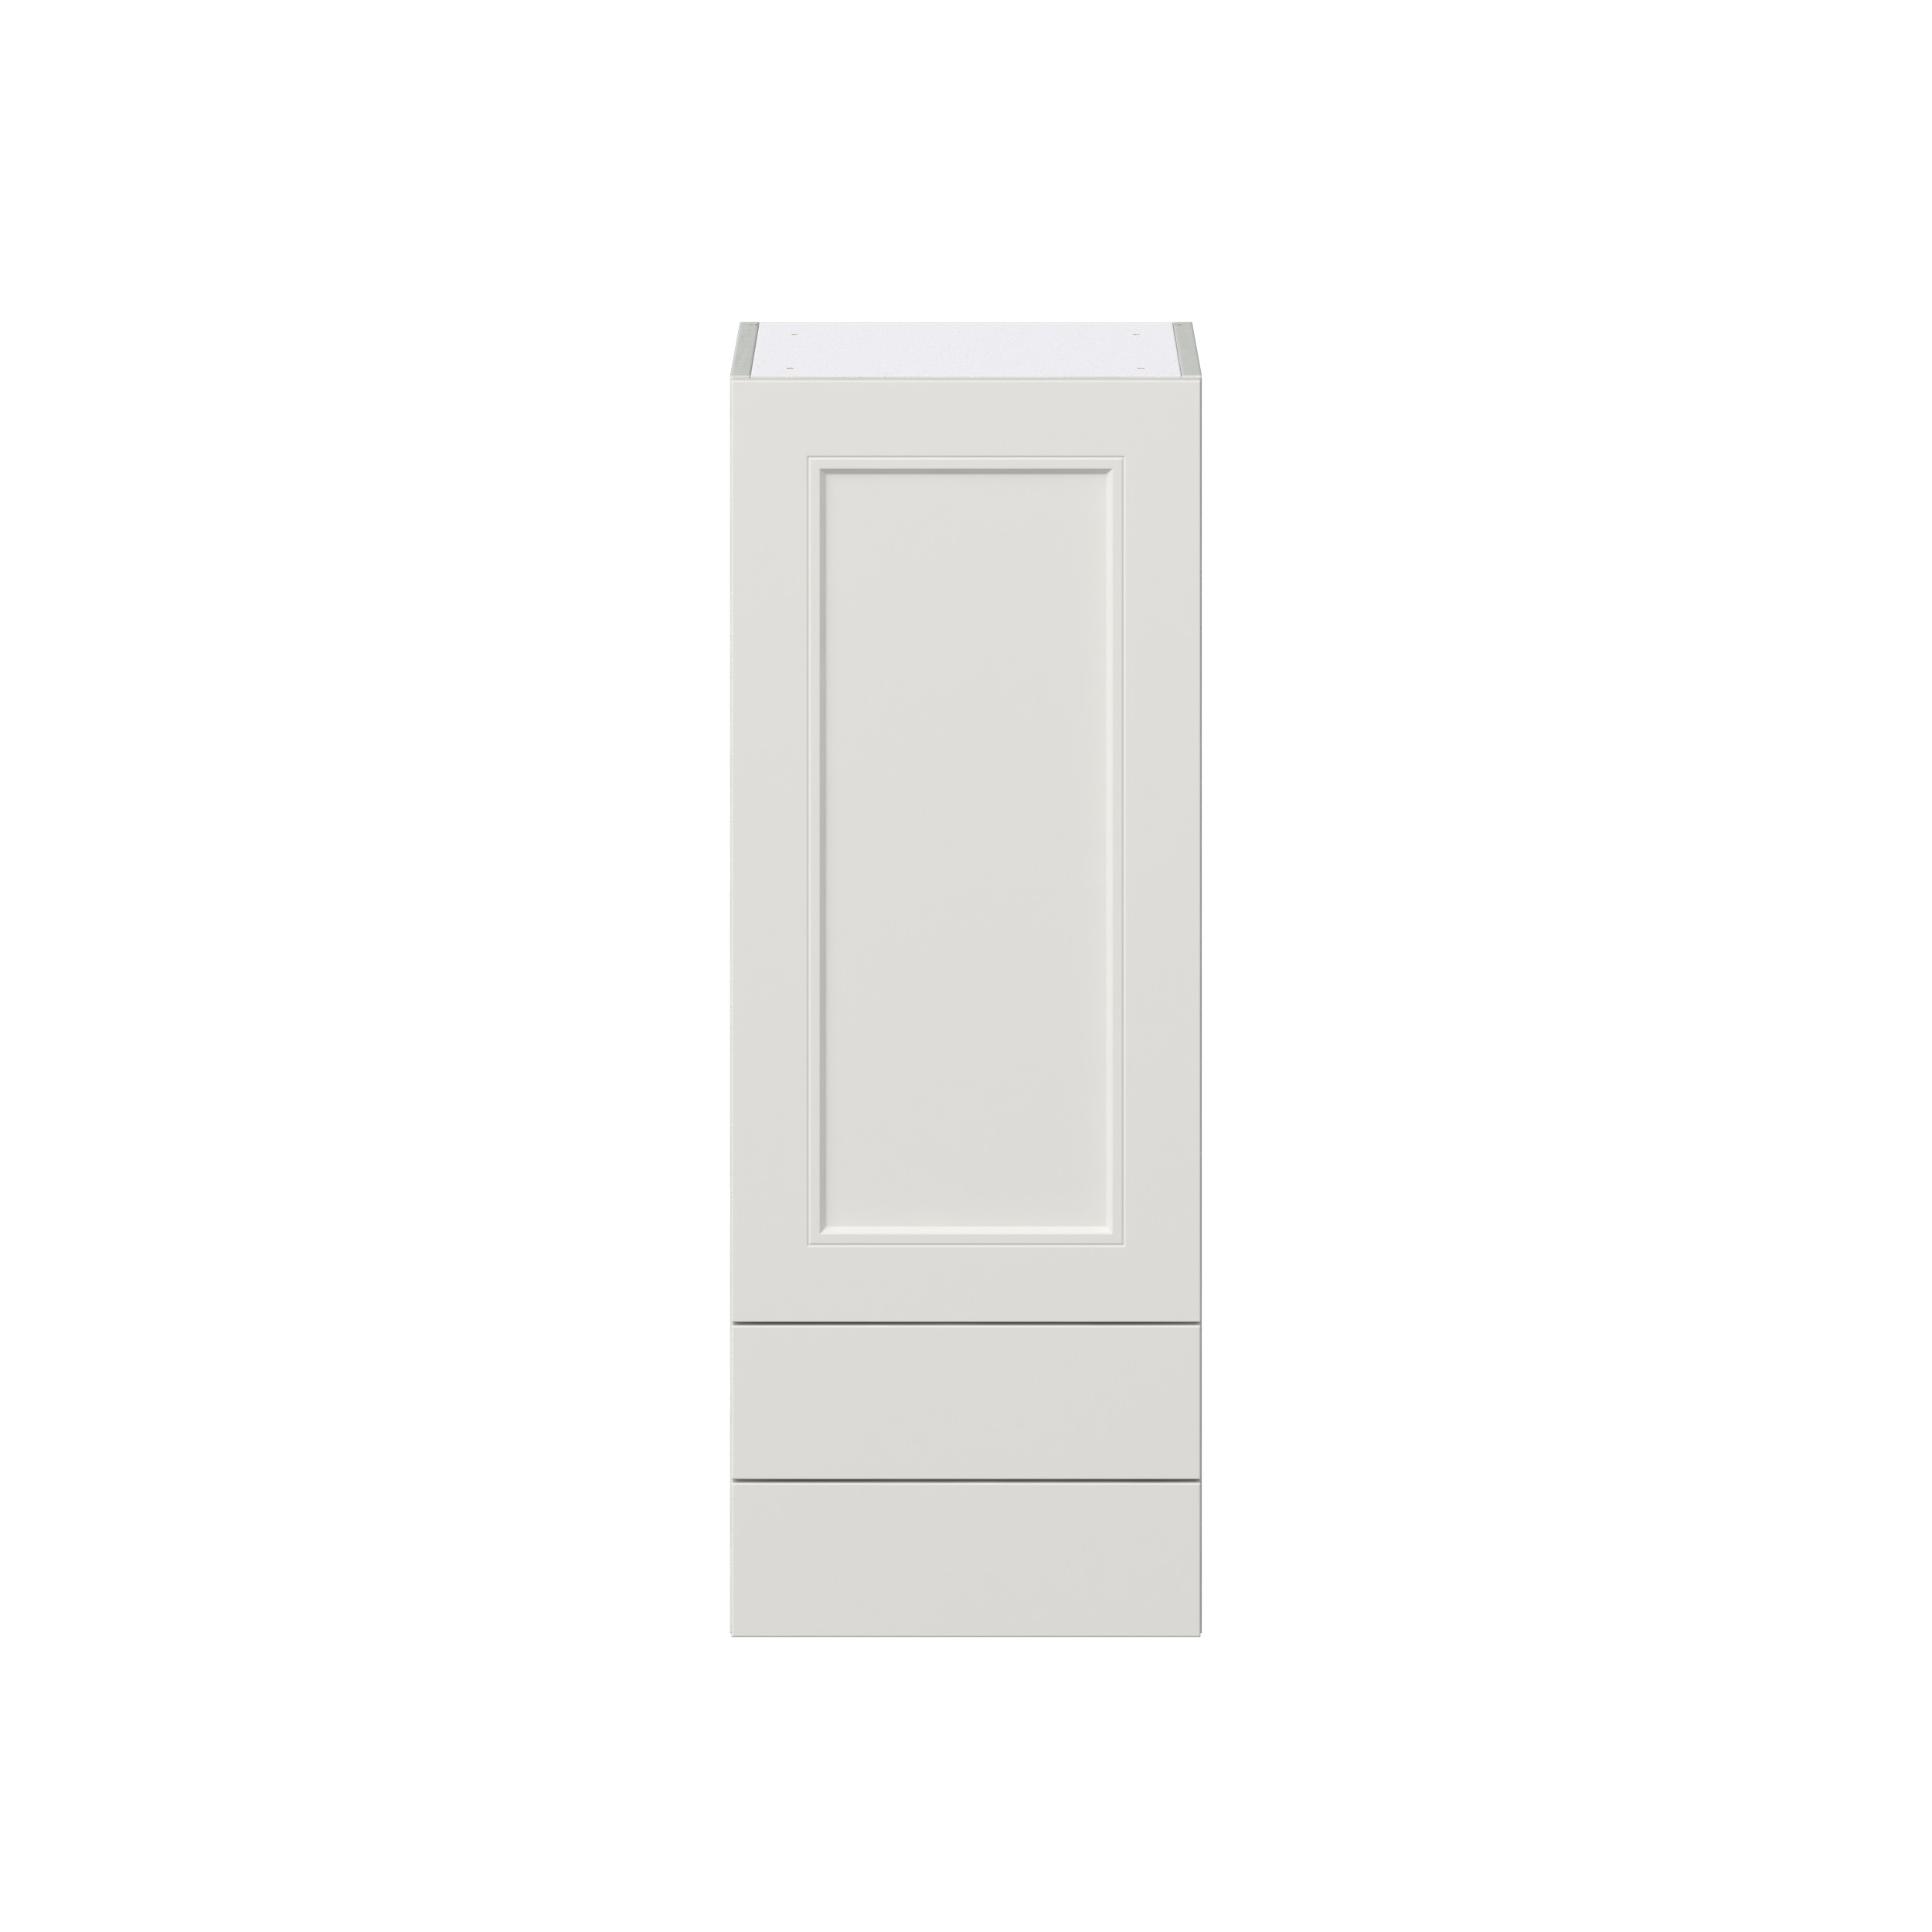 Wisteria Painted Light Gray Recessed Assembled Wall Cabinet with a Door and Two 5 in. Drawers (15 in. W x 40 in. H x 14 in. D)